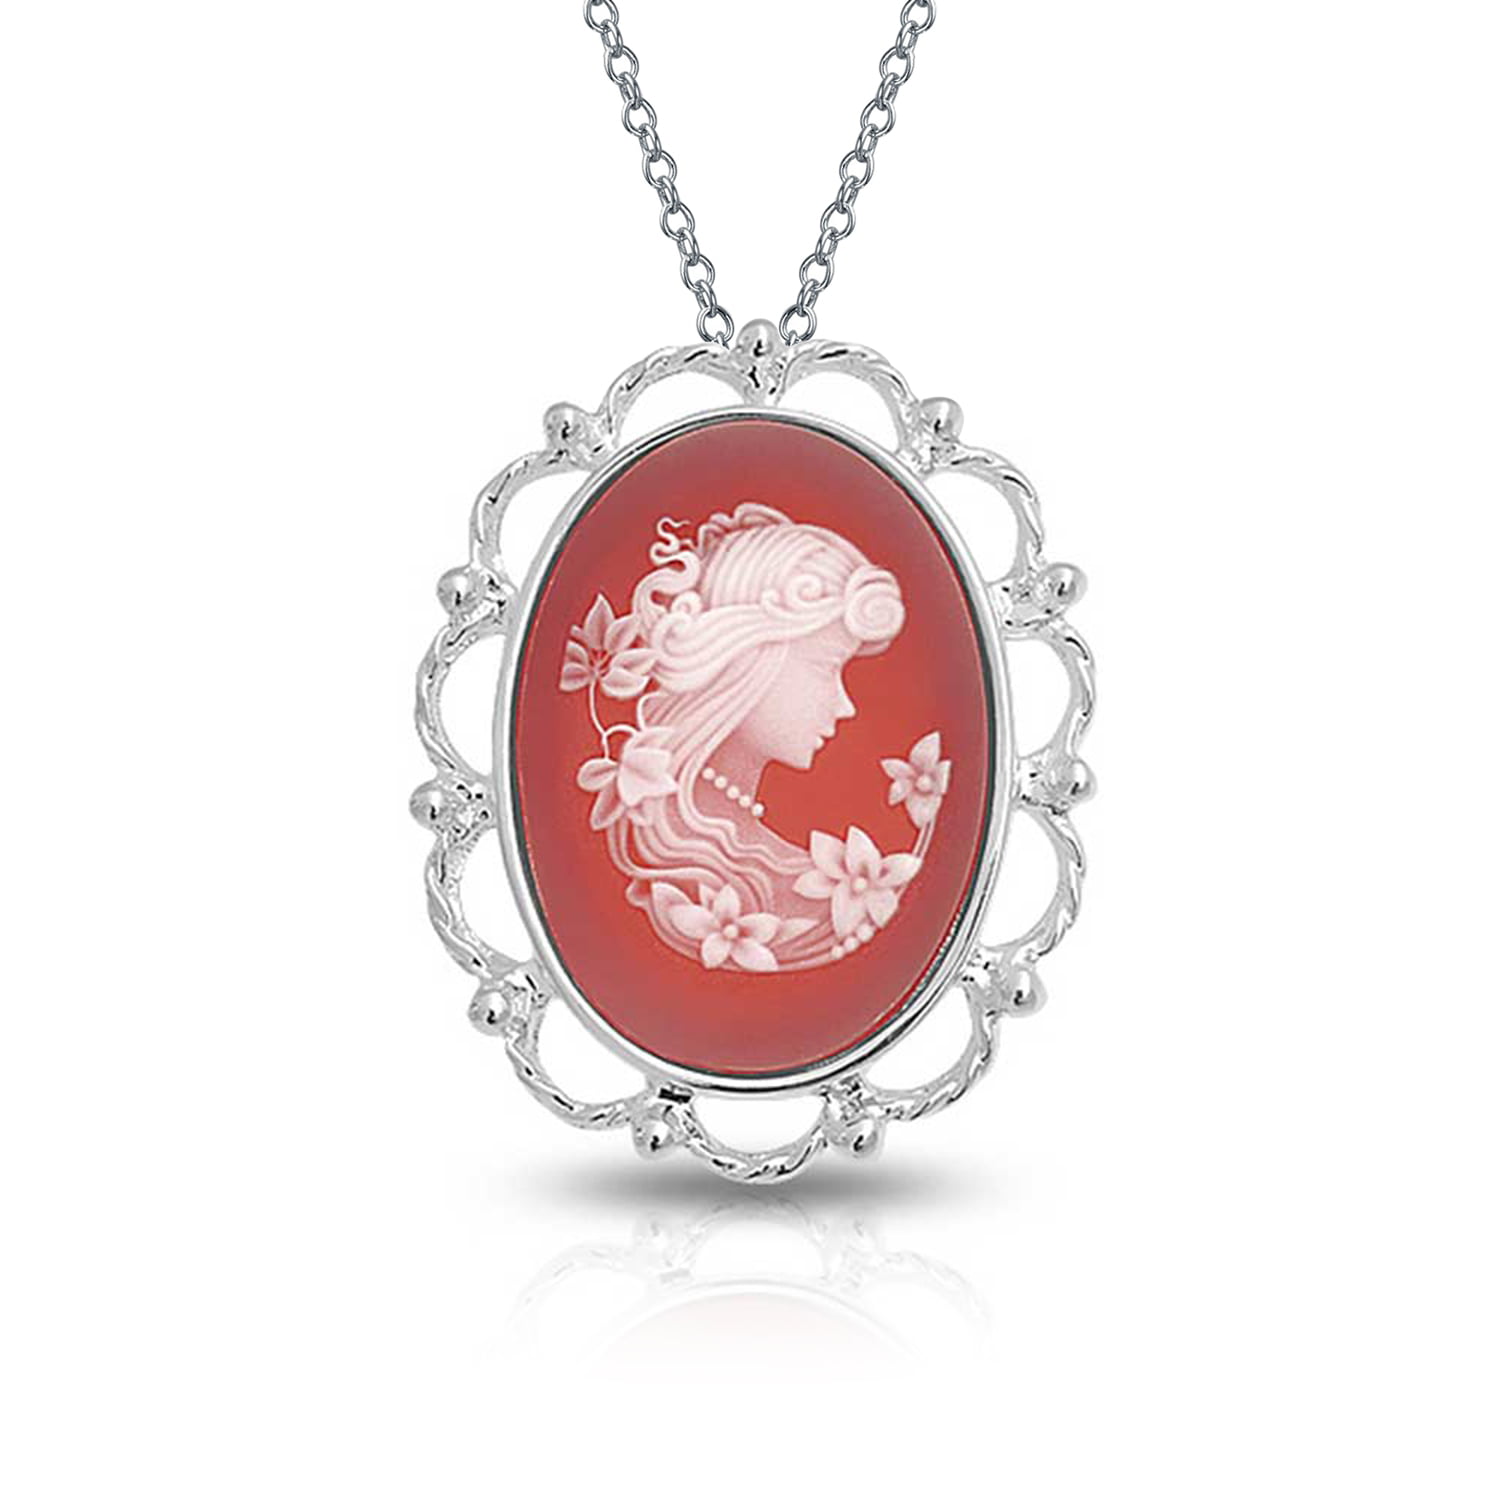 Wedgwood Jewelry Cameo in Antique Silver Plate Pendant